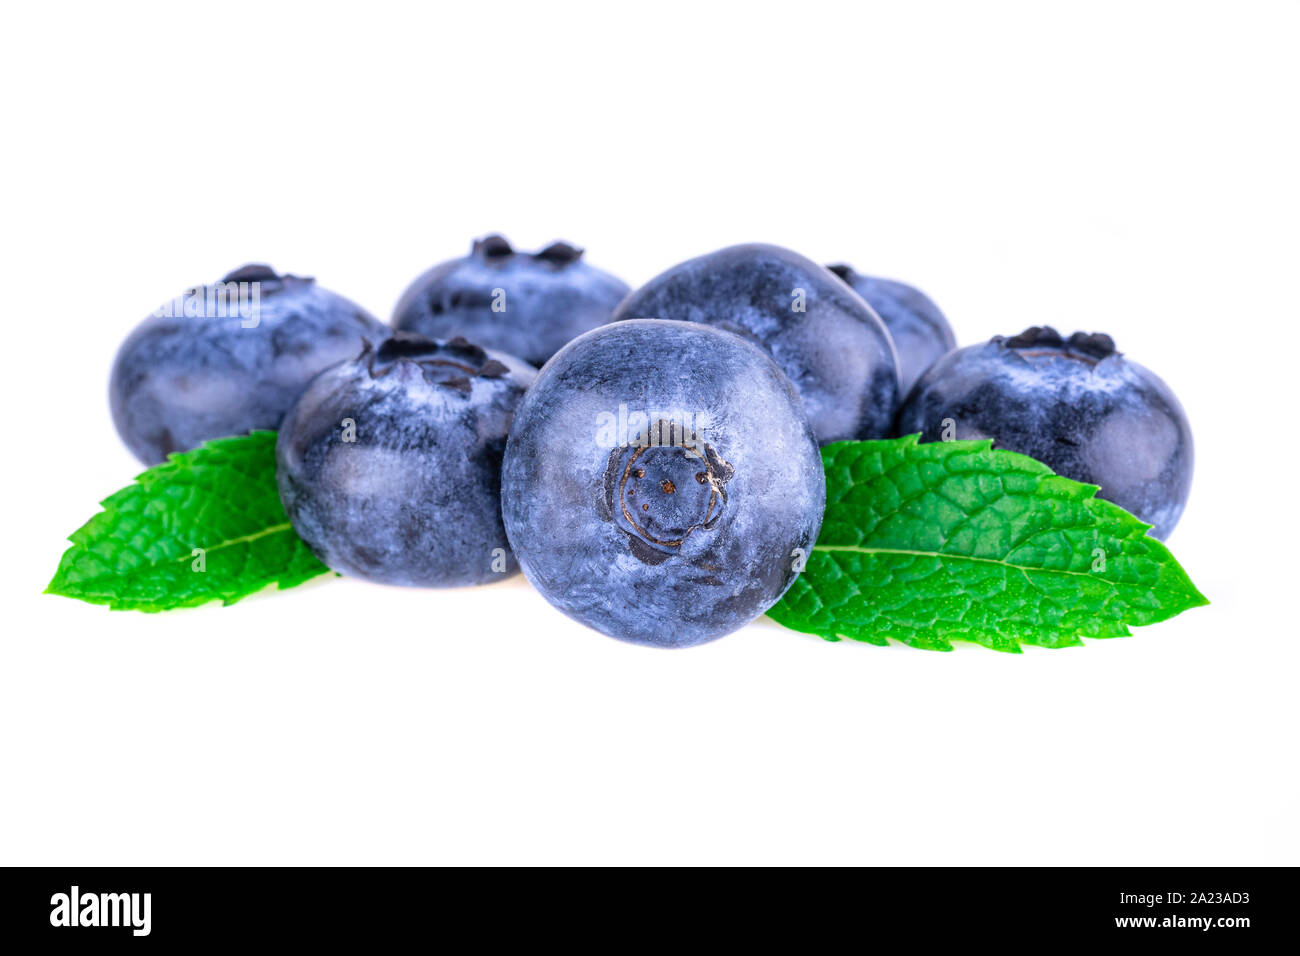 Blueberries in closeup. Fresh blueberries with mint leaves isolated on white background. Stock Photo